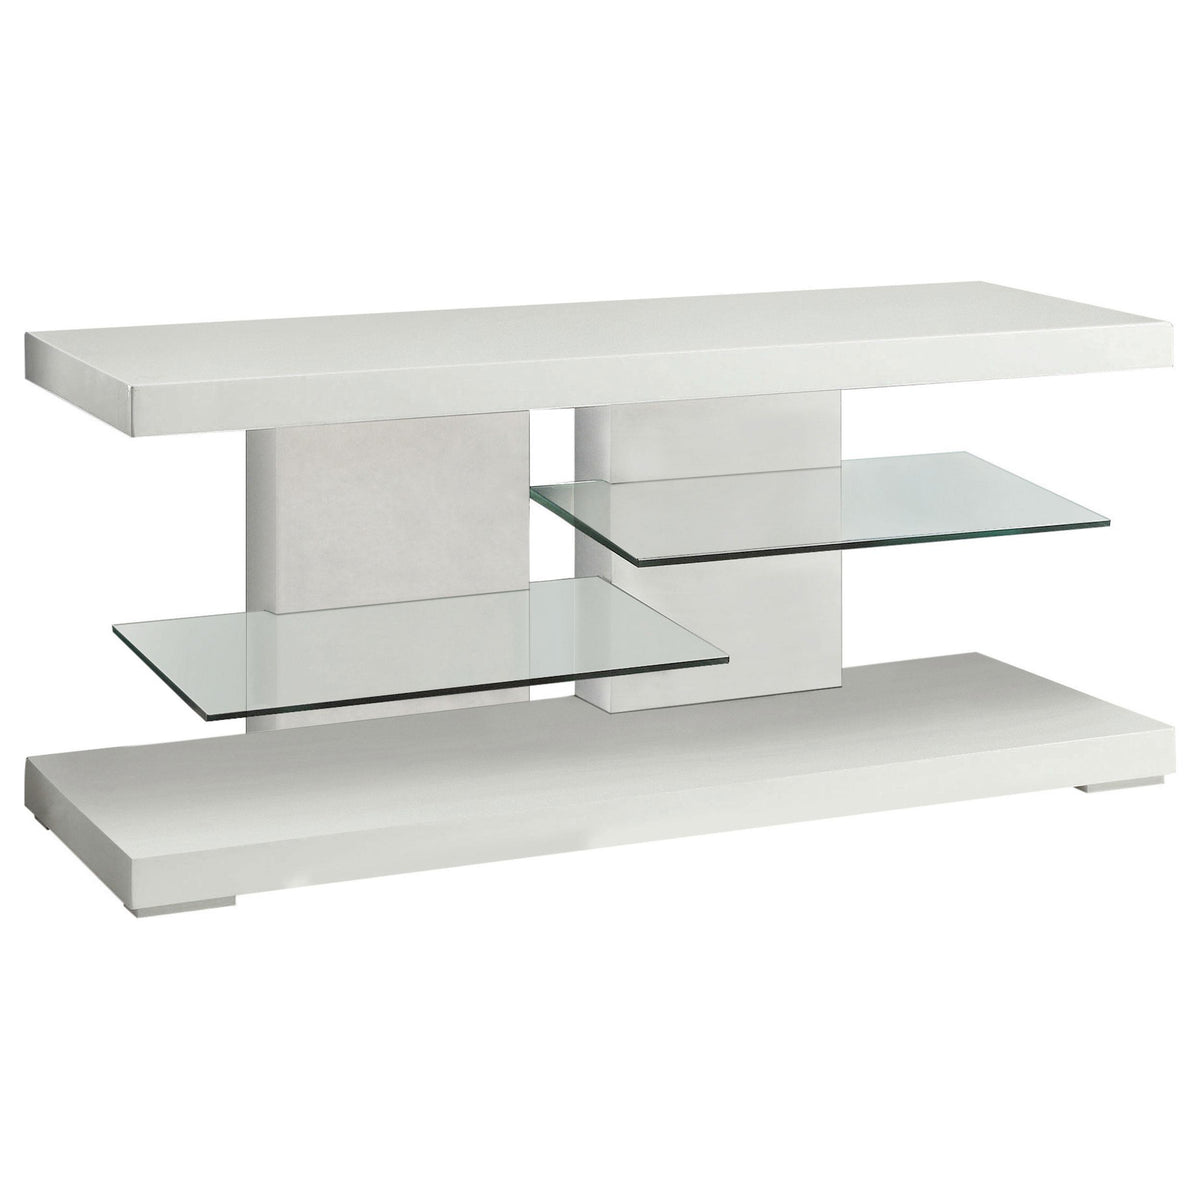 Cogswell 2-shelf TV Console Glossy White Cogswell 2-shelf TV Console Glossy White Half Price Furniture